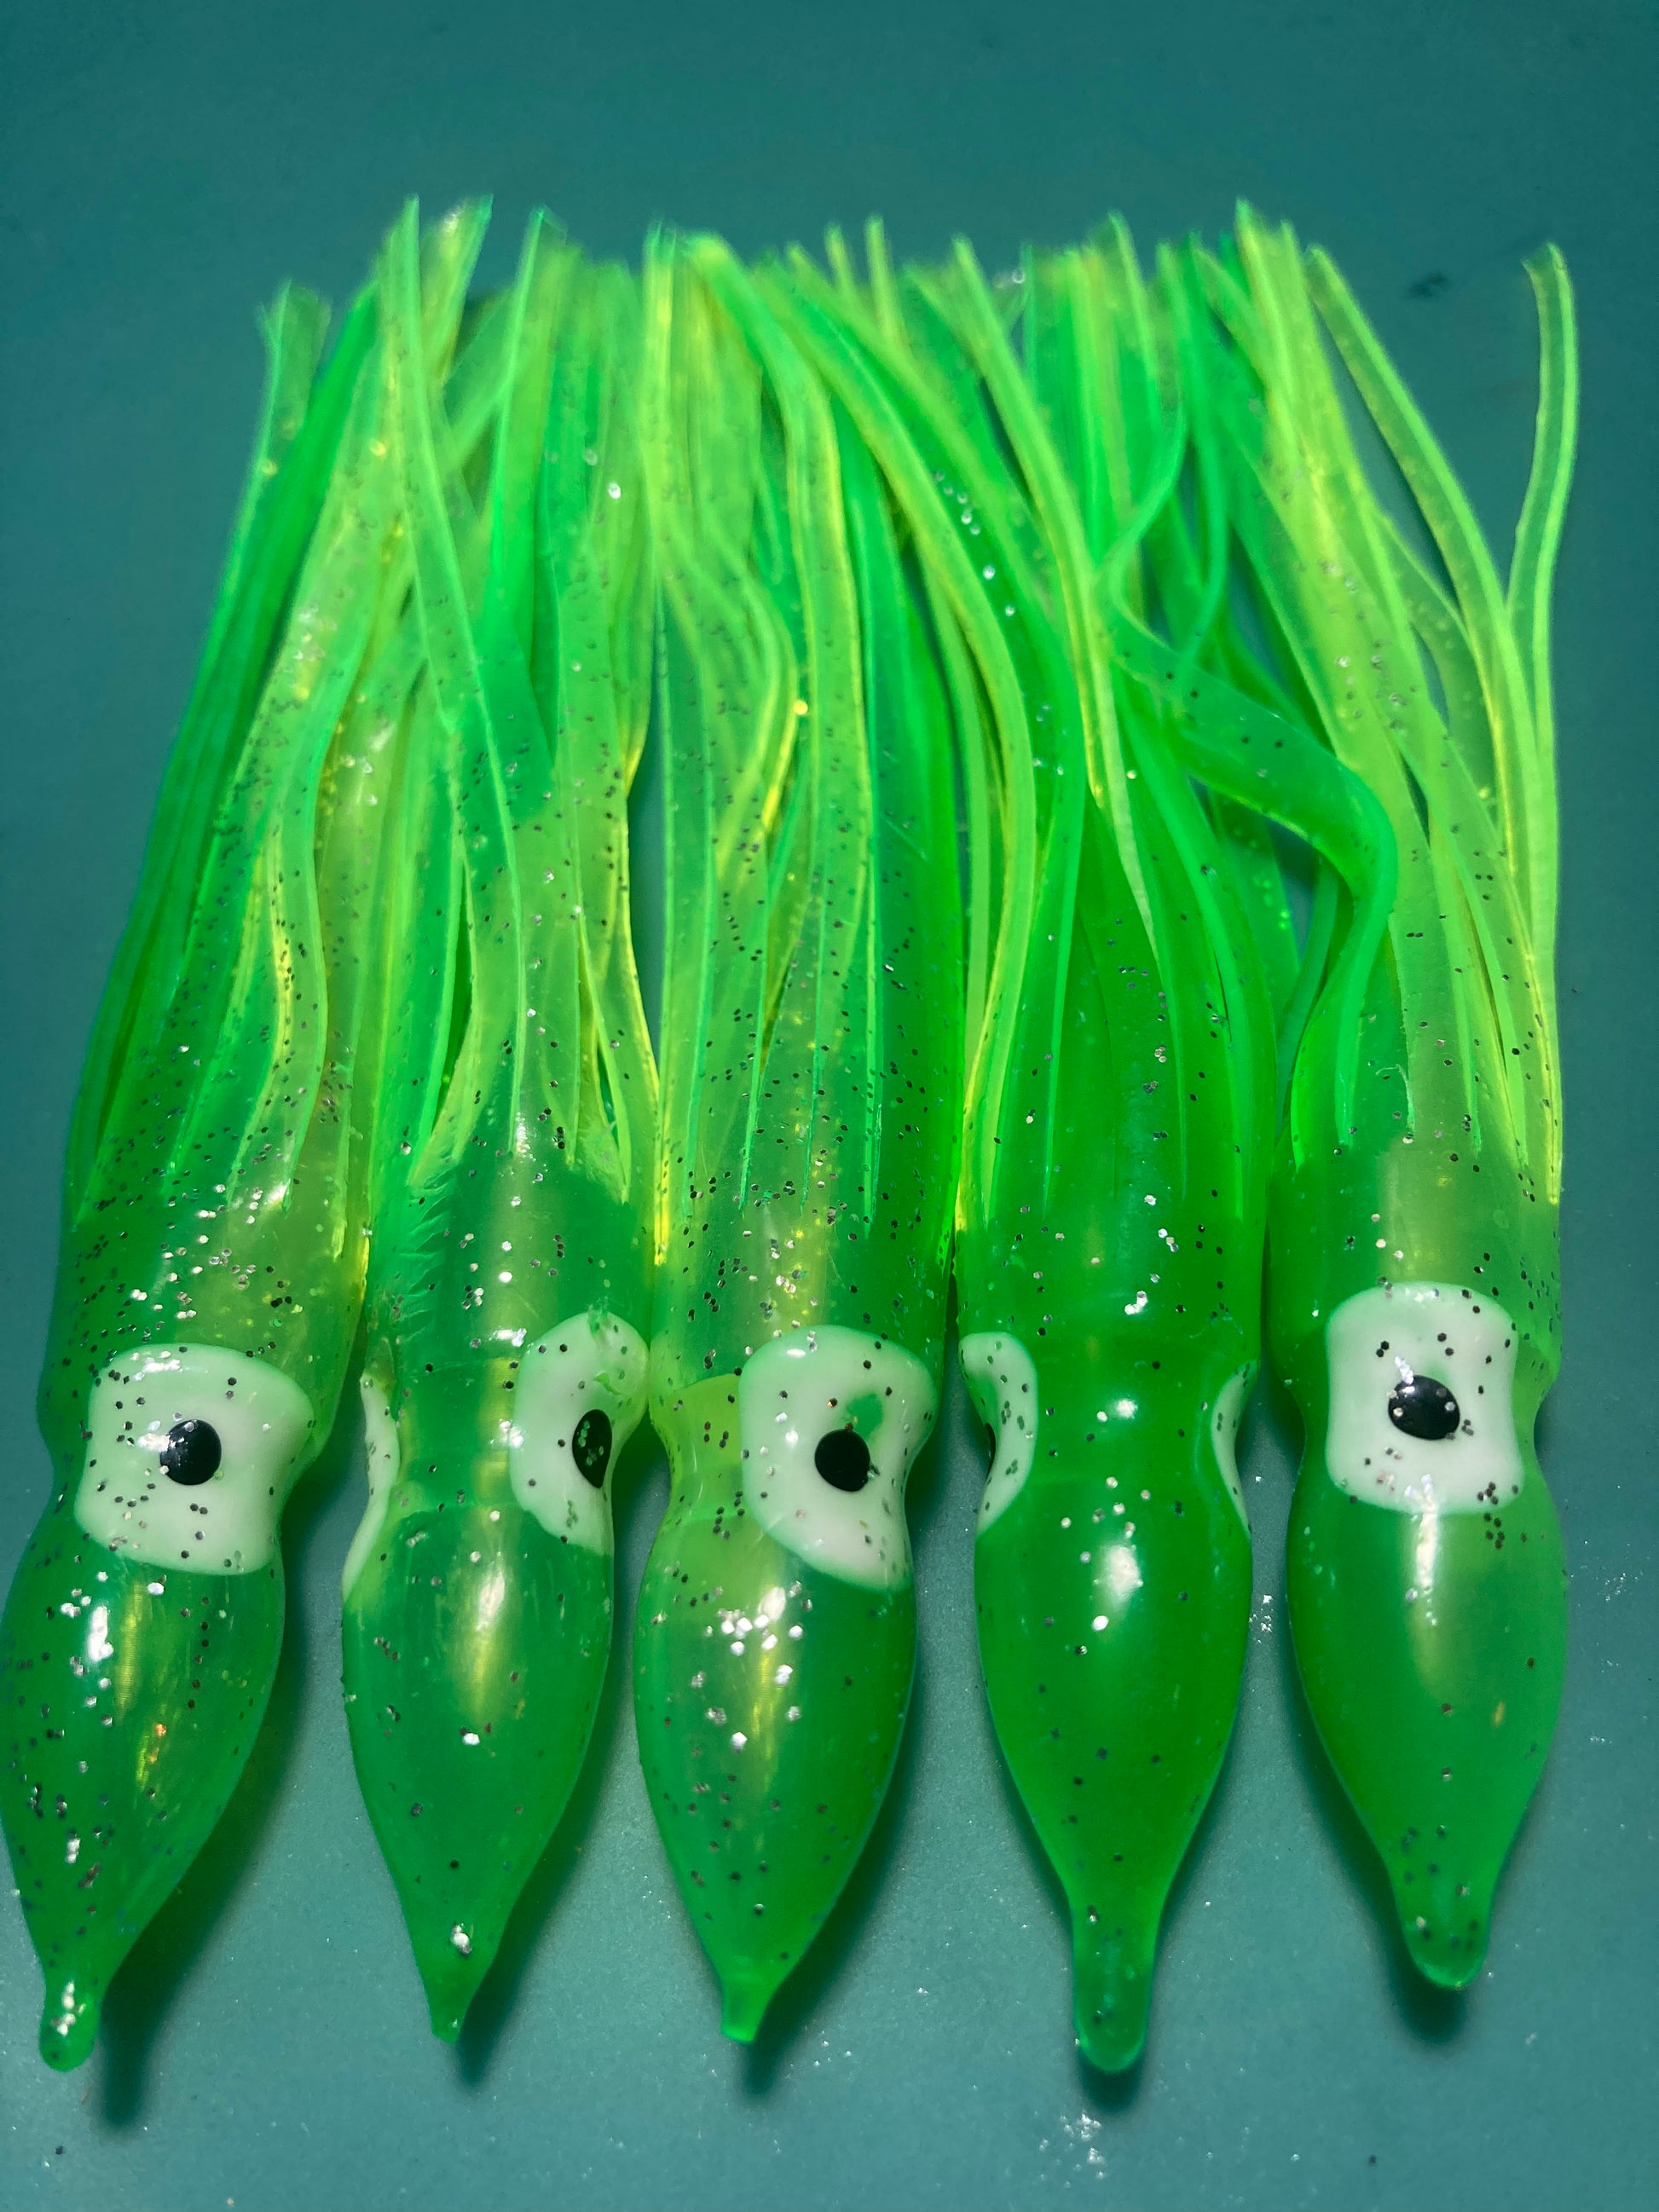 8Pcs 68g/107g Saltwater Trolling Lures Big Game Squid Skirt Octopus Fishing  Lures with Hook Leader